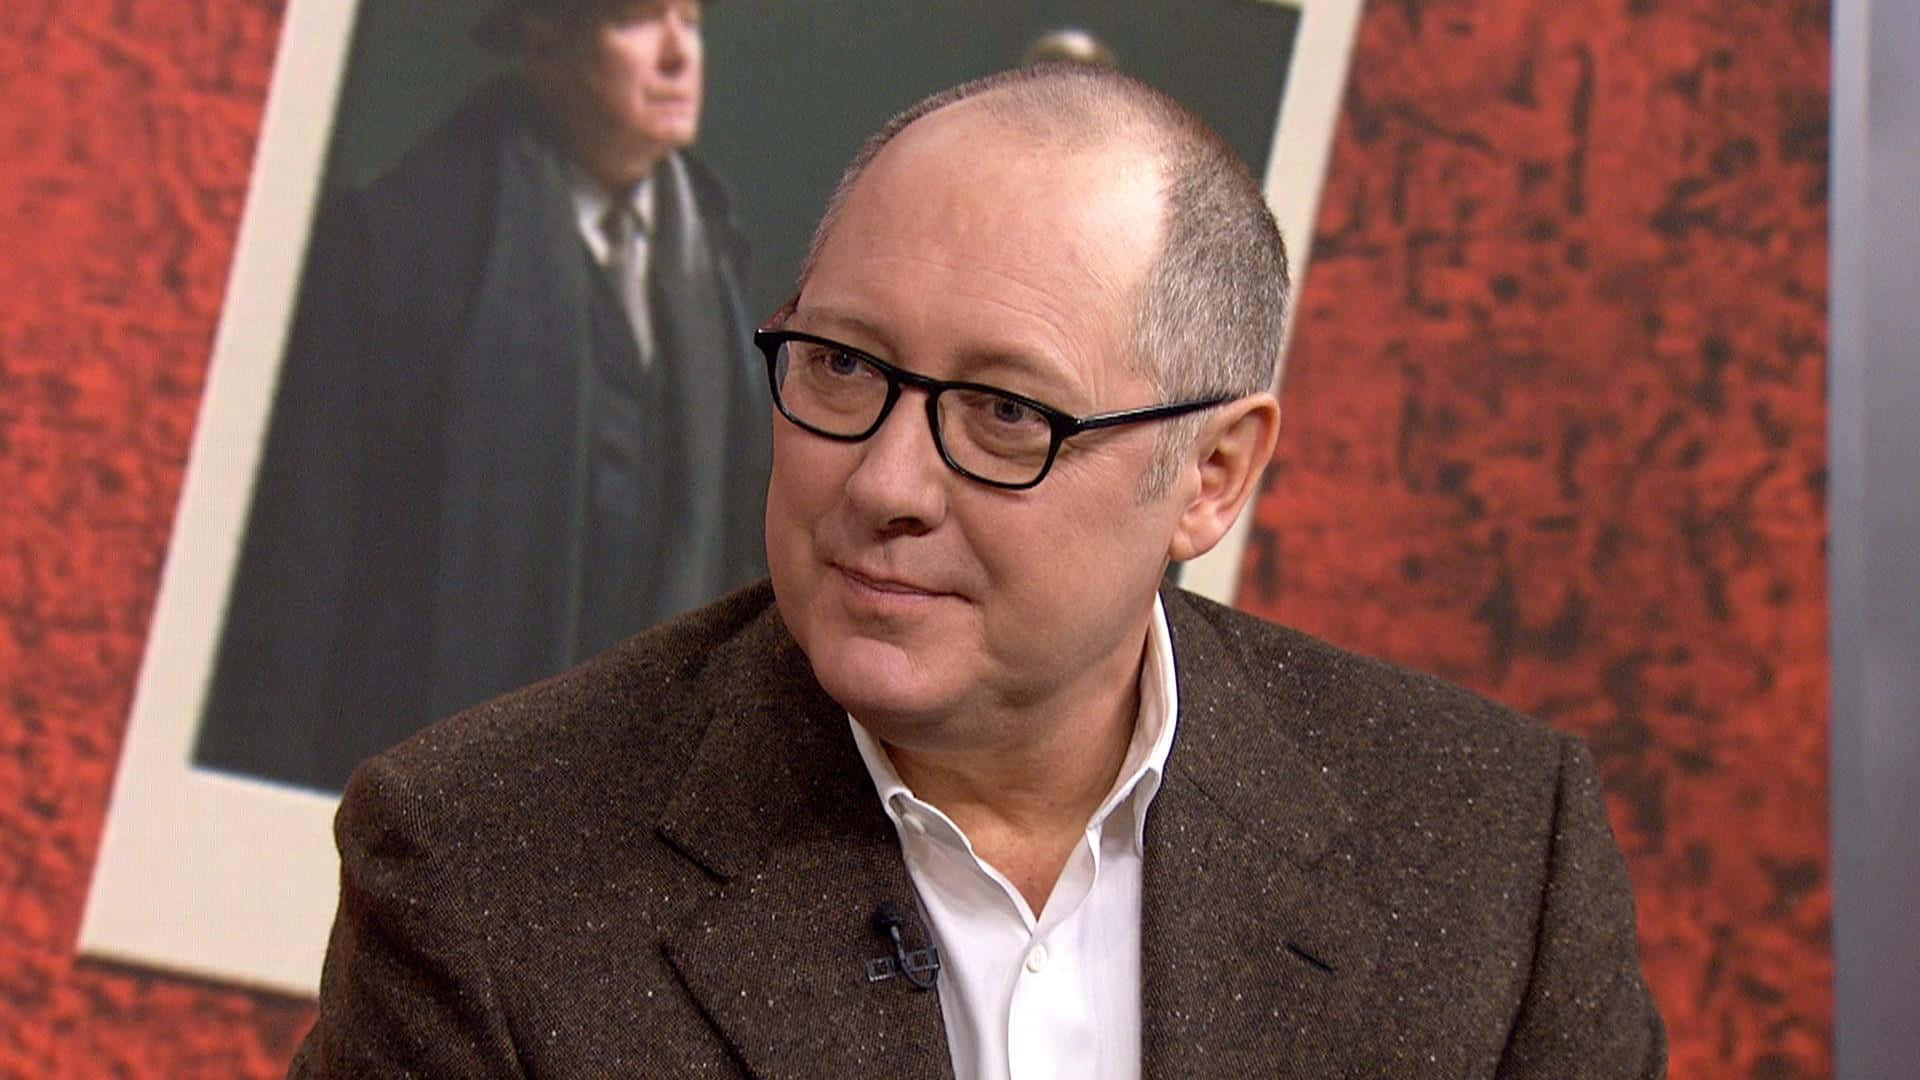 Jamesspader Is An American Actor, Known For His Roles In Tv Series And Movies. He Has Appeared In Popular Shows Like 